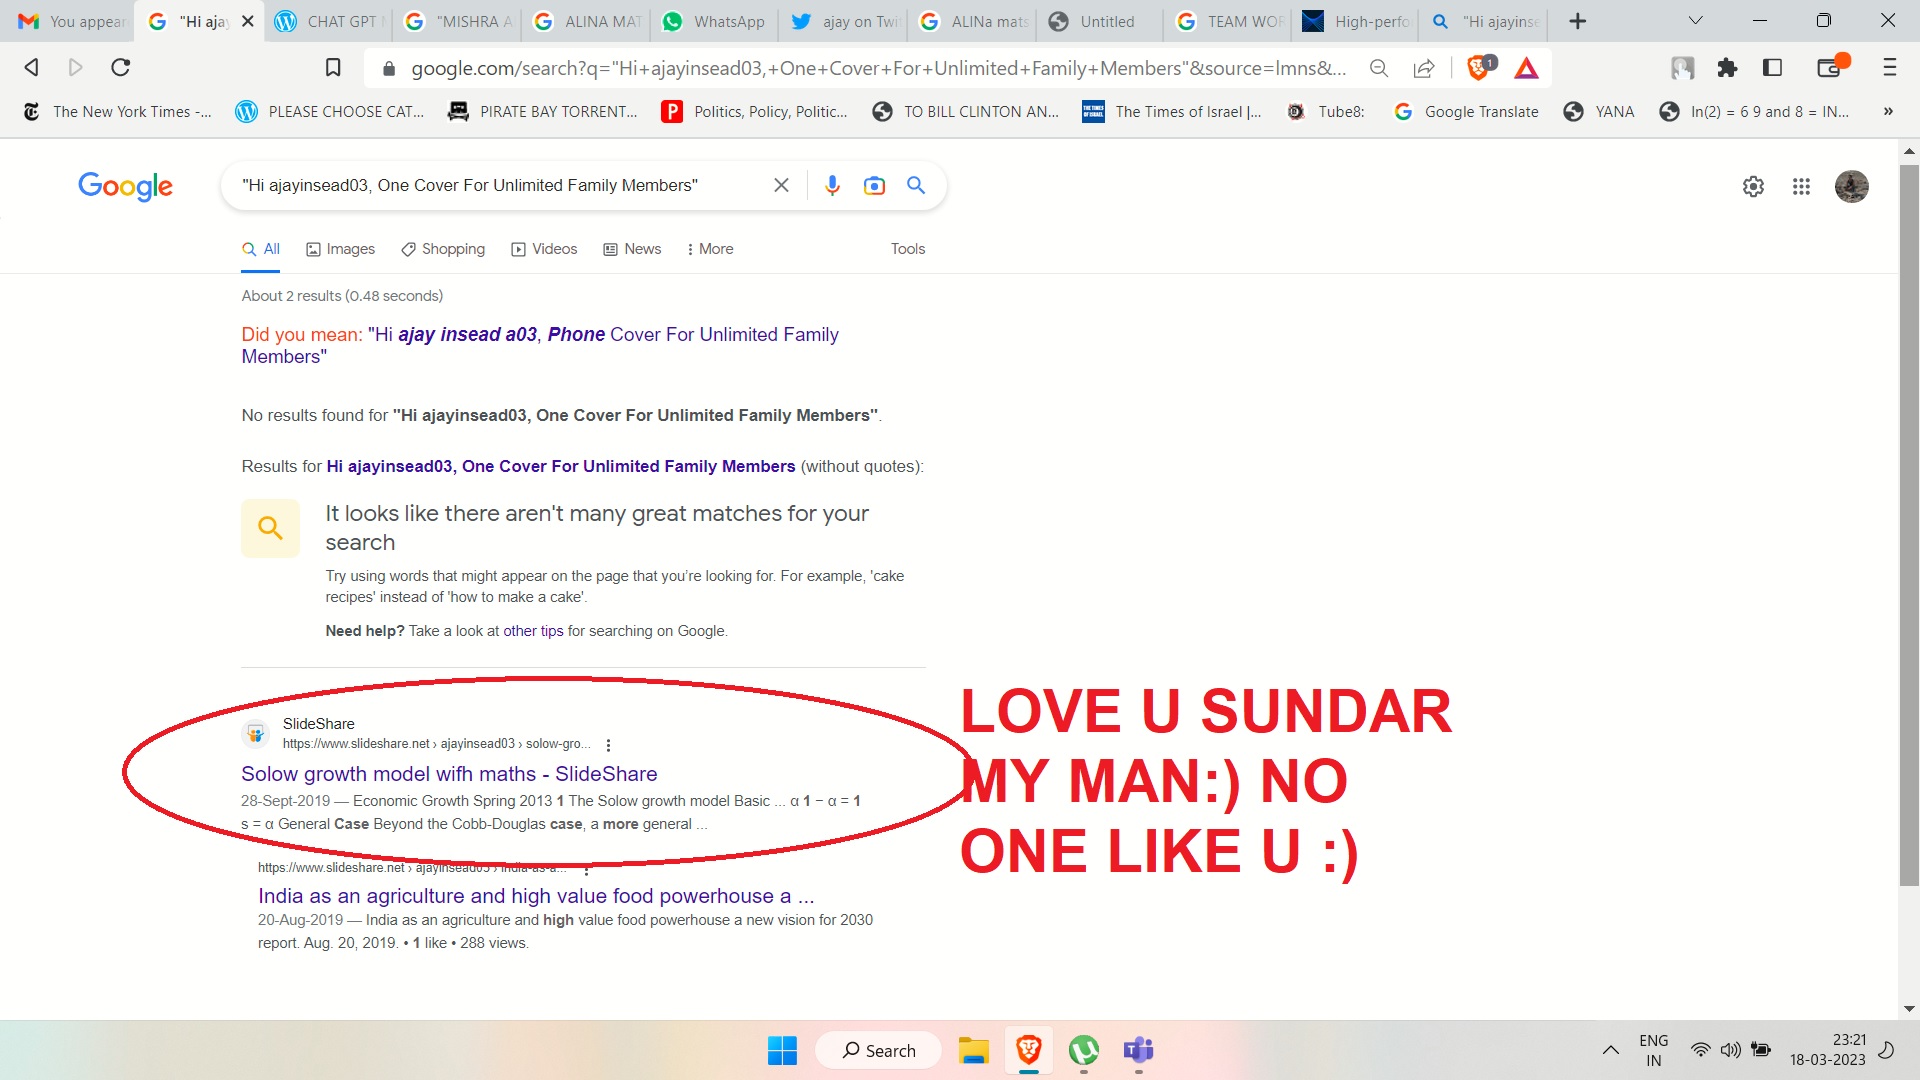 MISSION VISION STORY AND COMMUNICATUON .. GOOGLE VS MICROSOFT - WHY RESULTS NOT SHOWING UP IN MICROSOFT HELLO SUNDAR PICHAI BHAI TUM AADMI HO FUNDOO